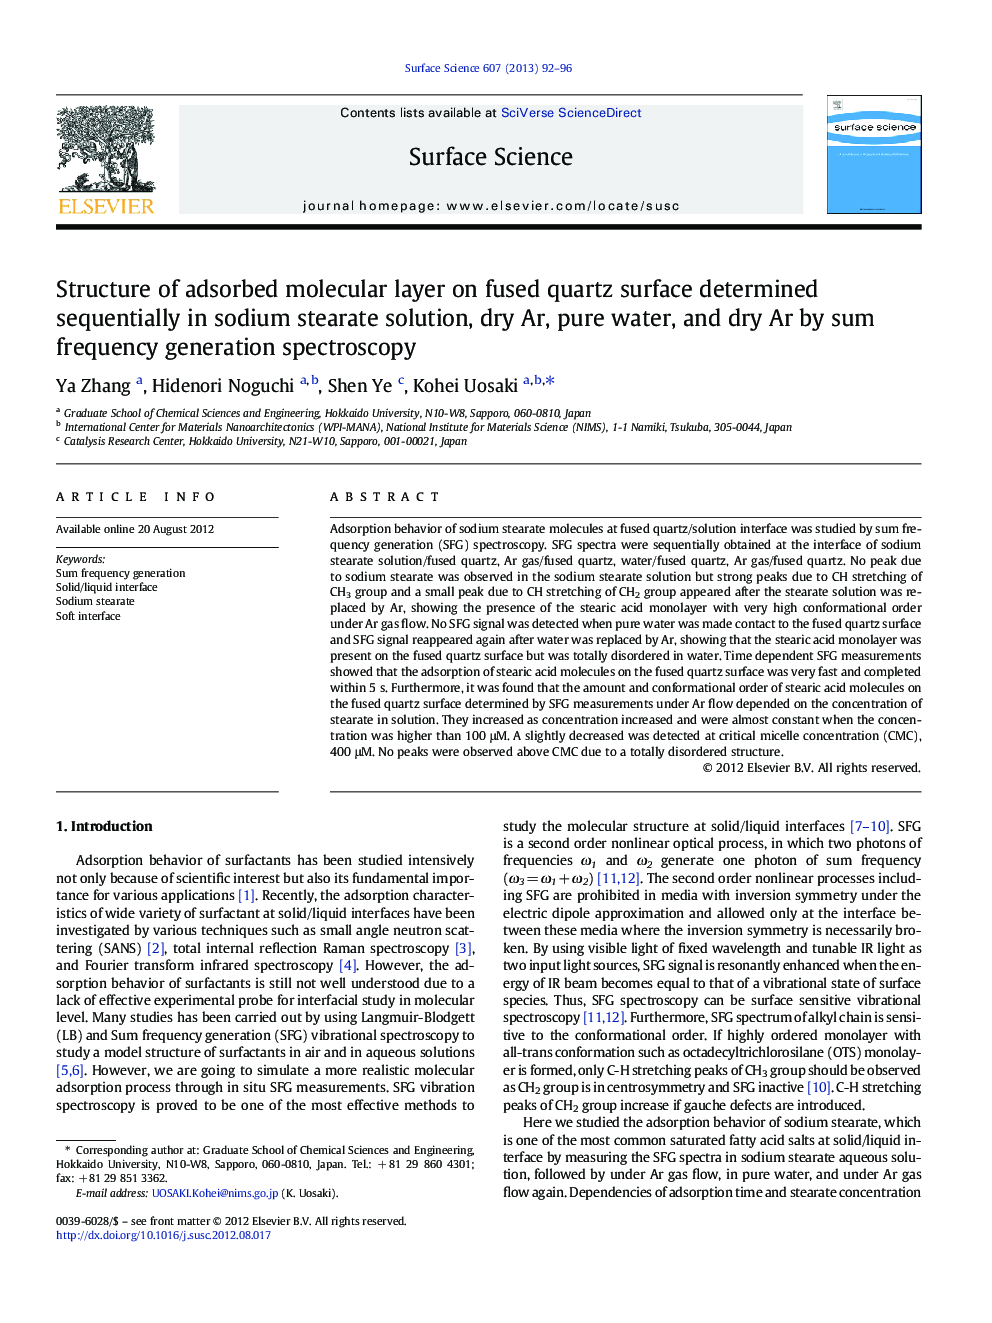 Structure of adsorbed molecular layer on fused quartz surface determined sequentially in sodium stearate solution, dry Ar, pure water, and dry Ar by sum frequency generation spectroscopy